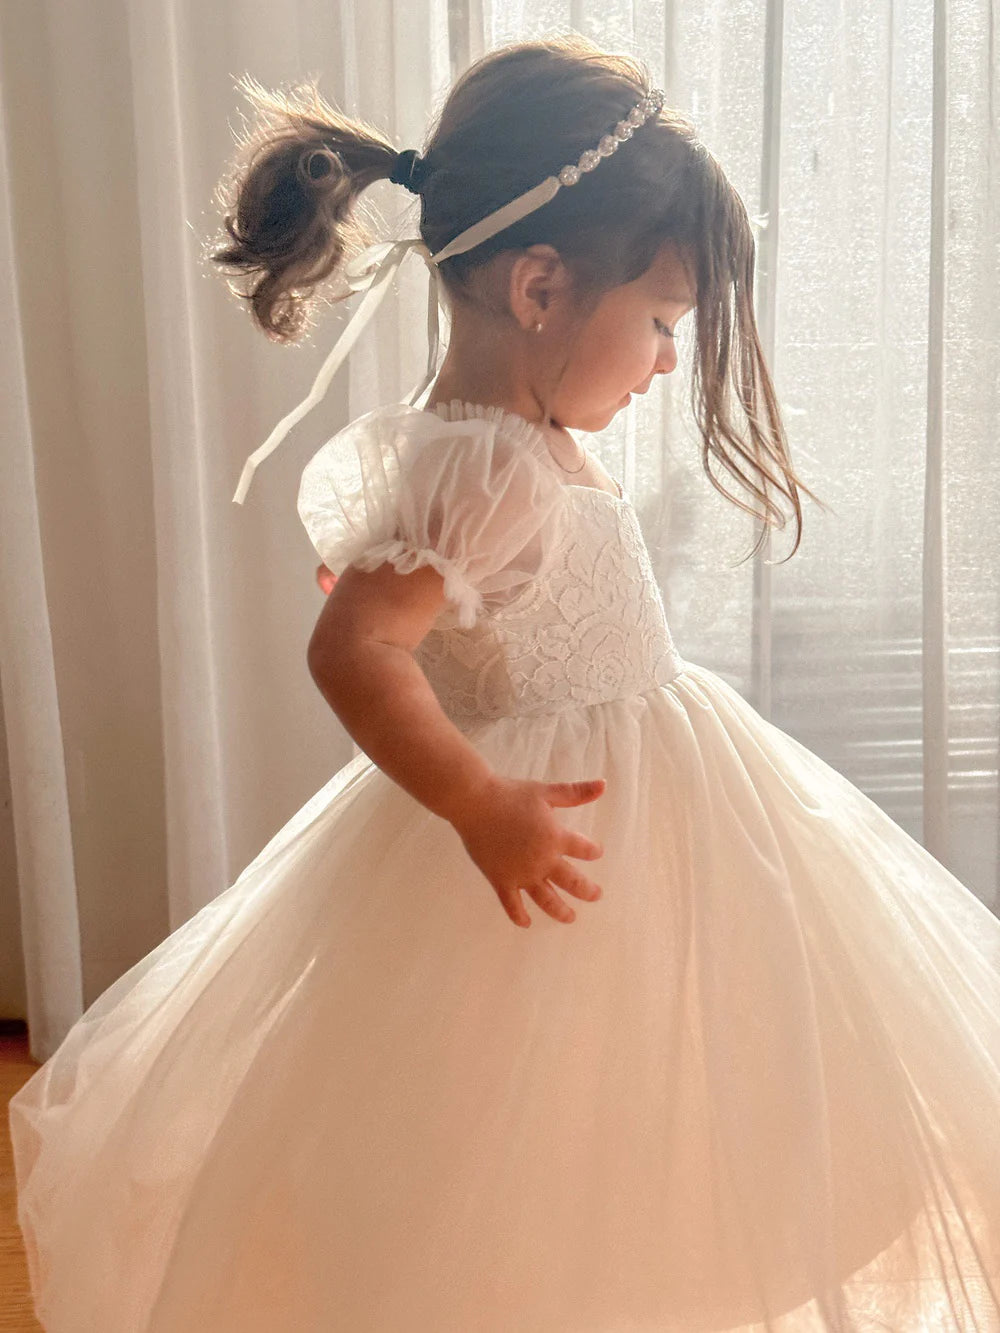 Stunning Dark Green Beaded Flower Girl Dress With Ruffles Perfect For  Weddings, Communion, Birthdays, And Photoshoots From Lindaxu90, $84.89 |  DHgate.Com